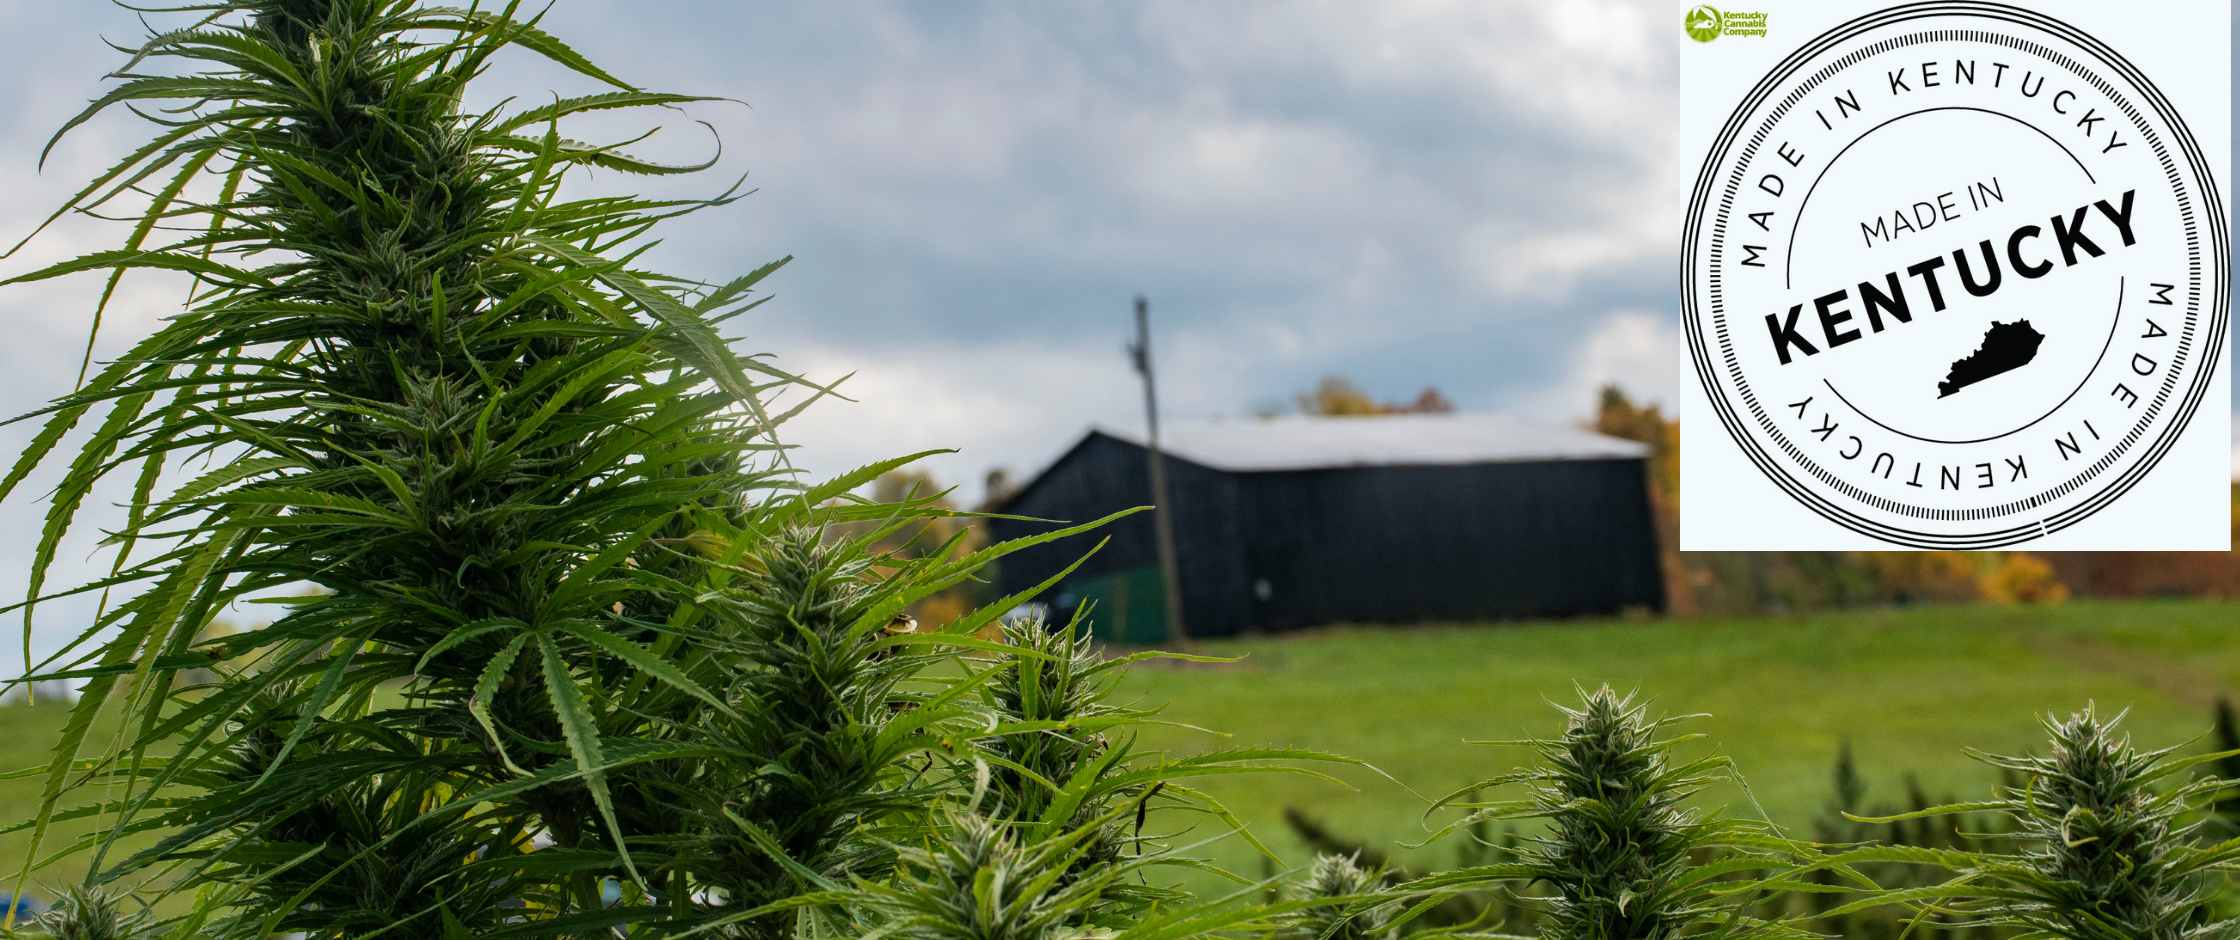 Kentucky CBD hemp field with a rustic barn in the background, overlaid with a "Made in Kentucky" badge, representing Bluegrass Hemp Oil products.